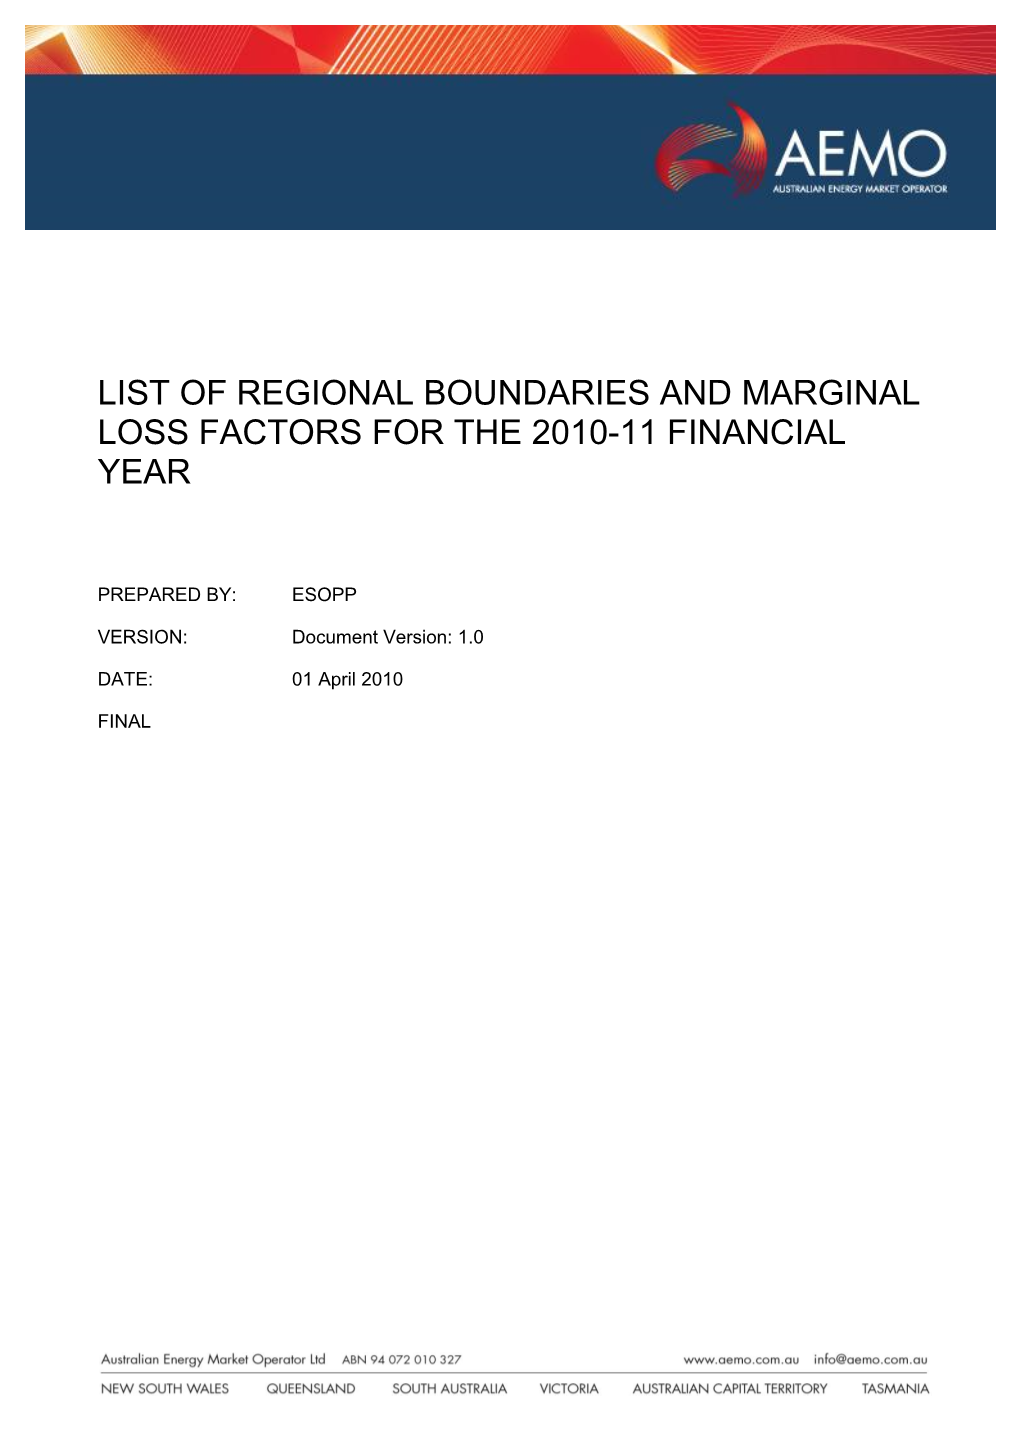 List of Regional Boundaries and Marginal Loss Factors for the 2009